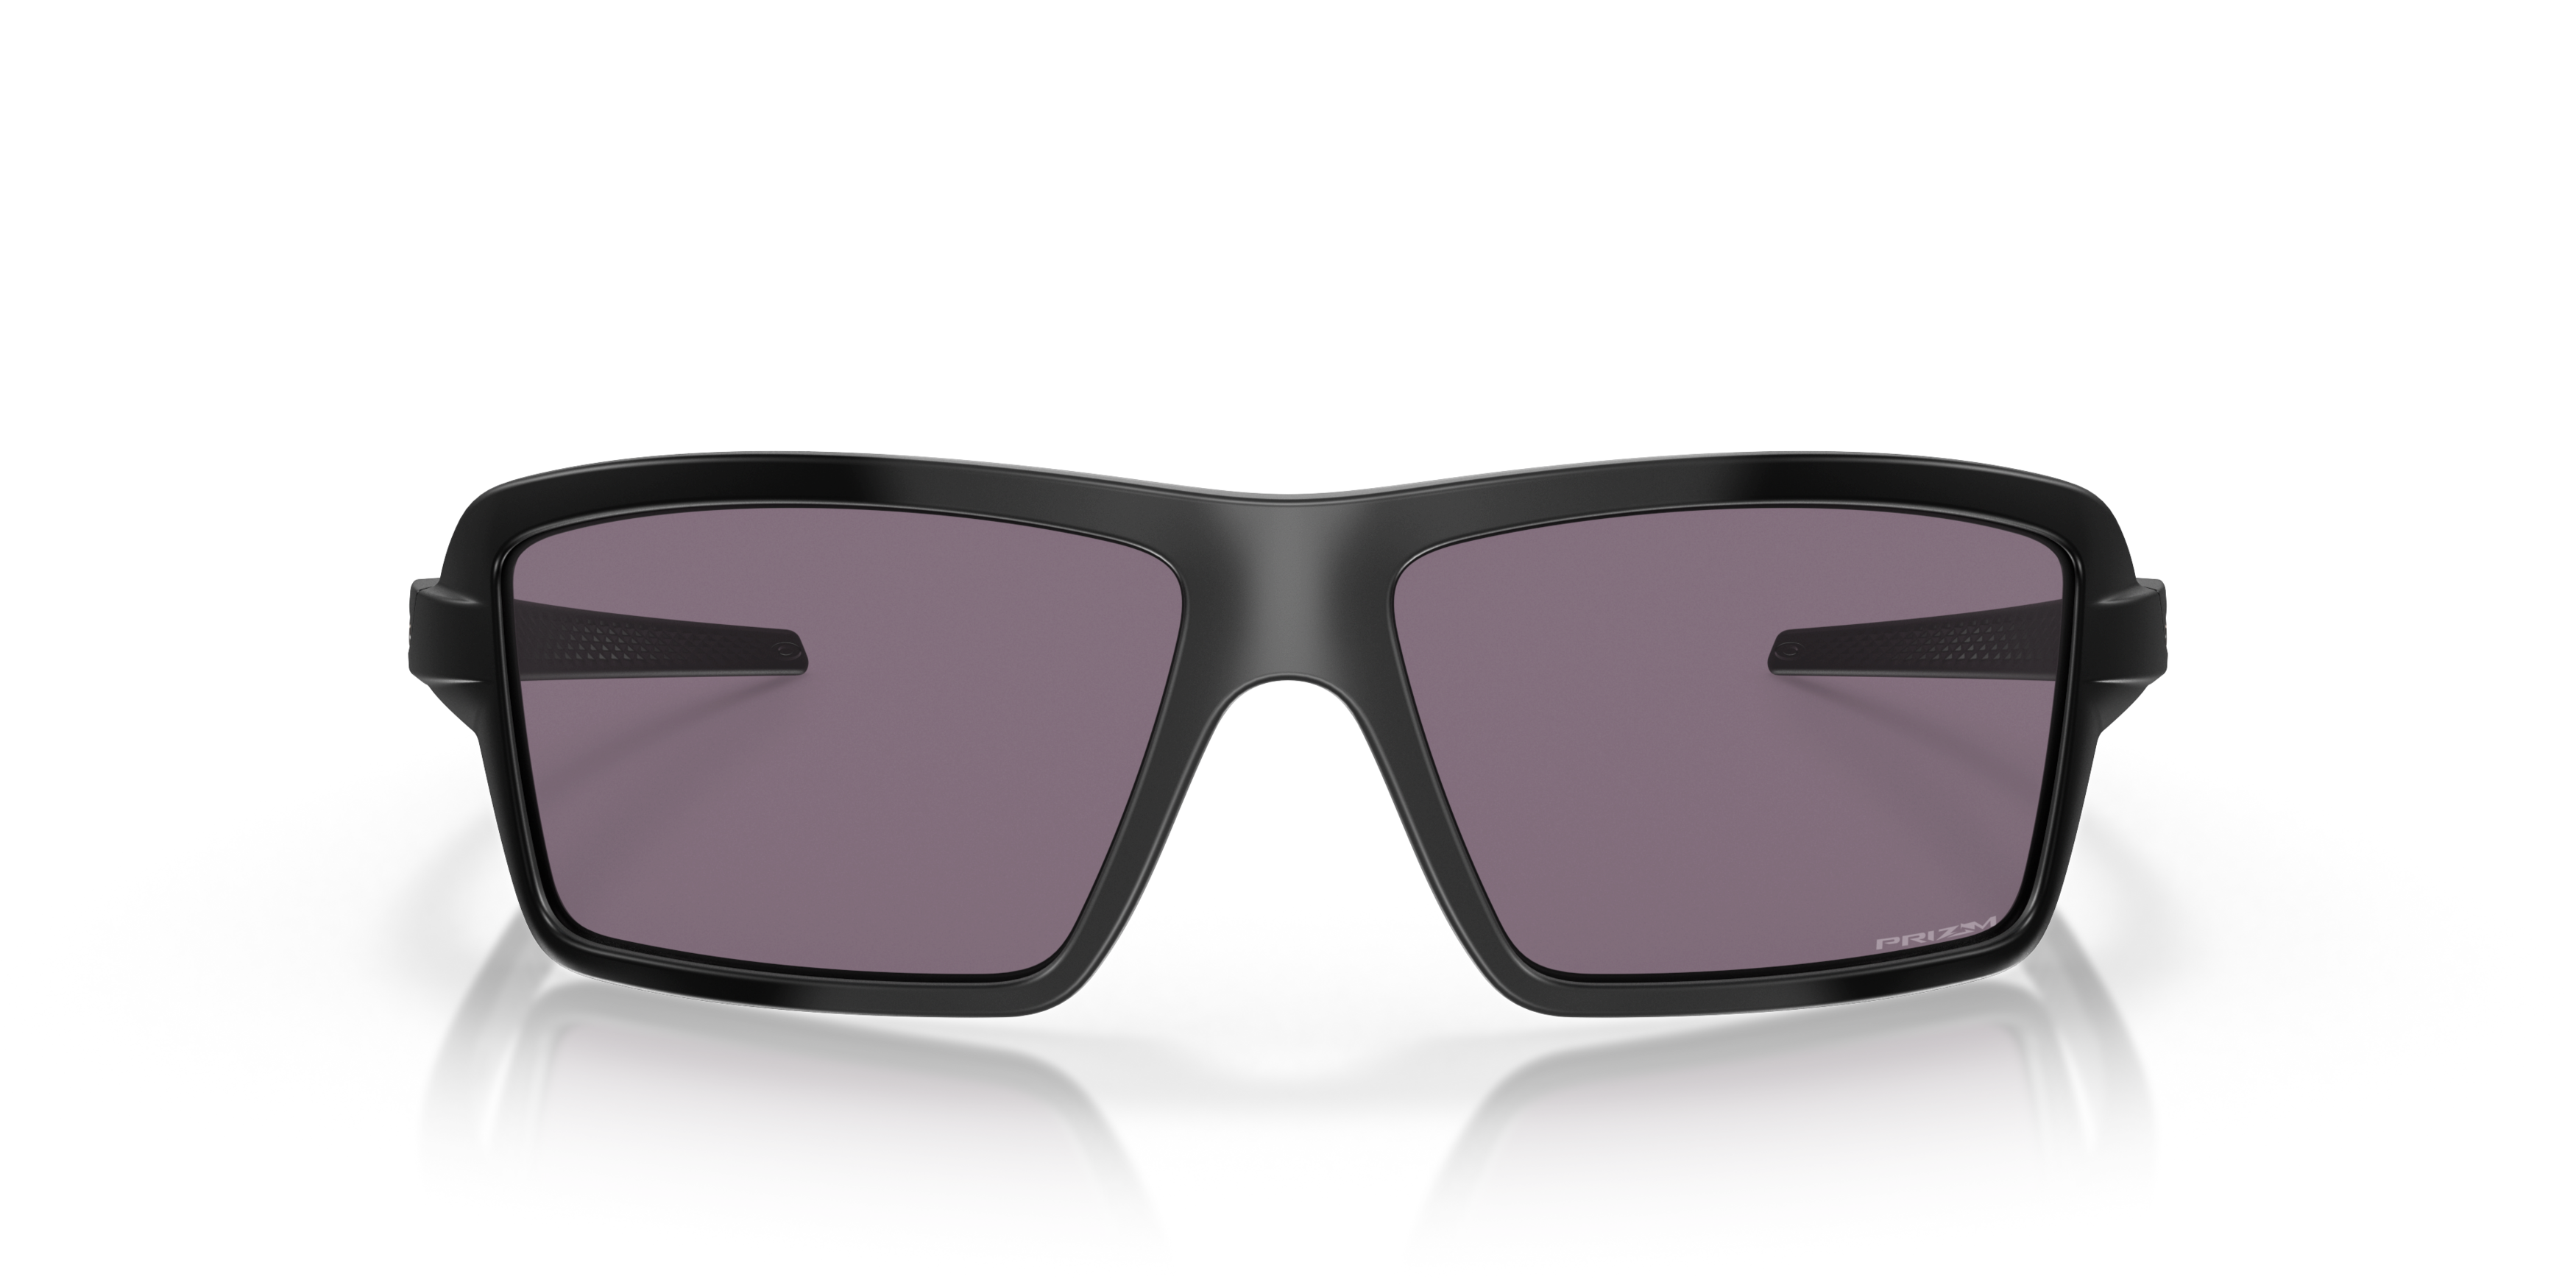 [products.image.front] Oakley 0OO9129 912901